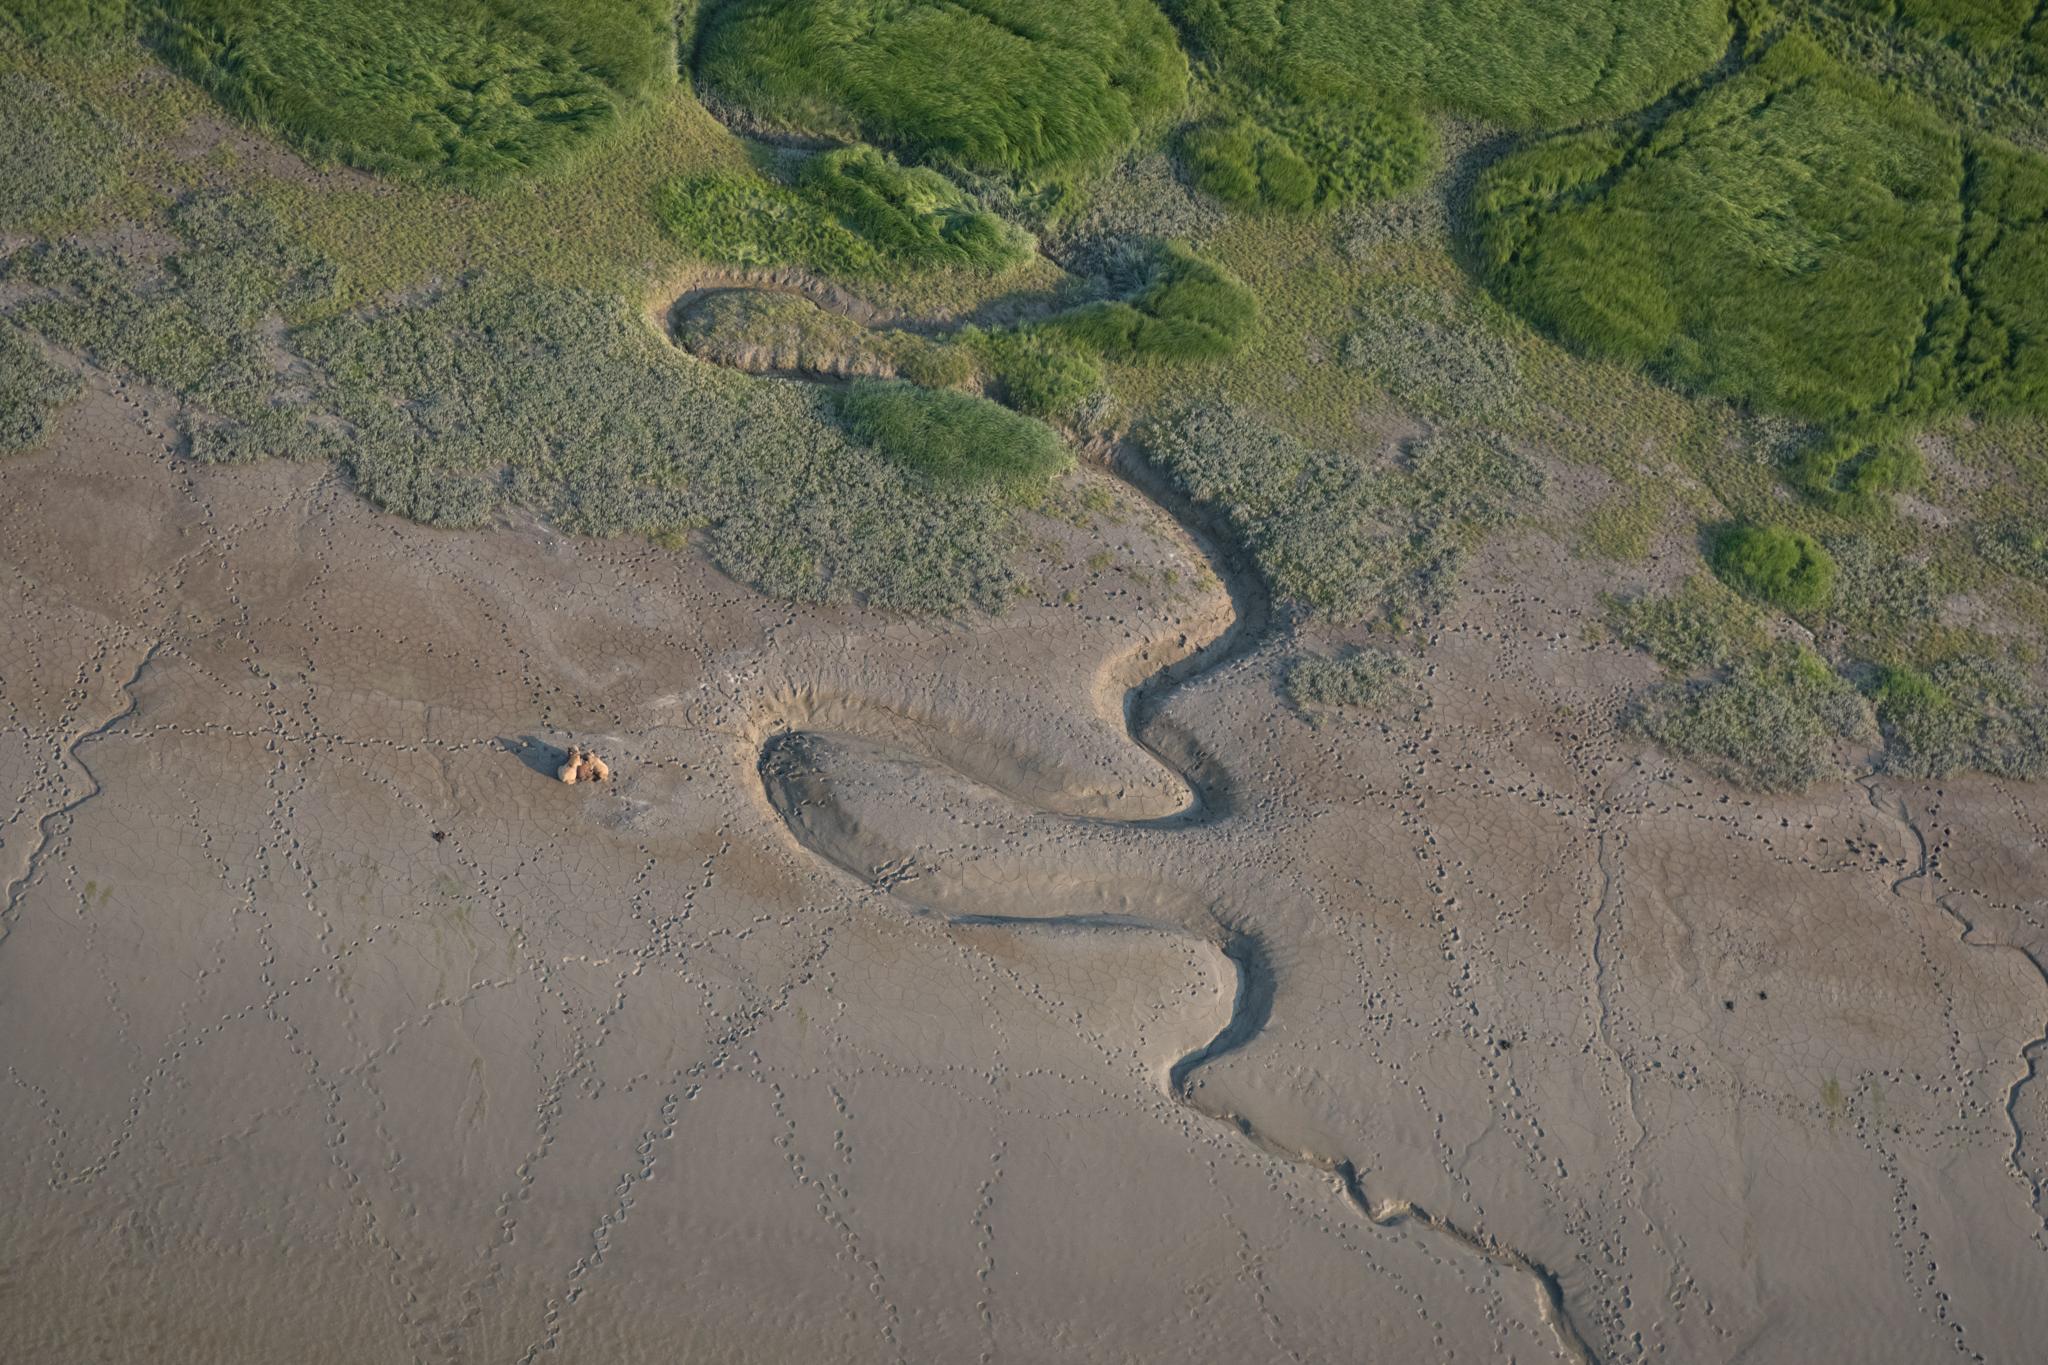 Rivers etch patterns in the silty shores of Chinitna Bay, a renowned brown bear viewing area in...